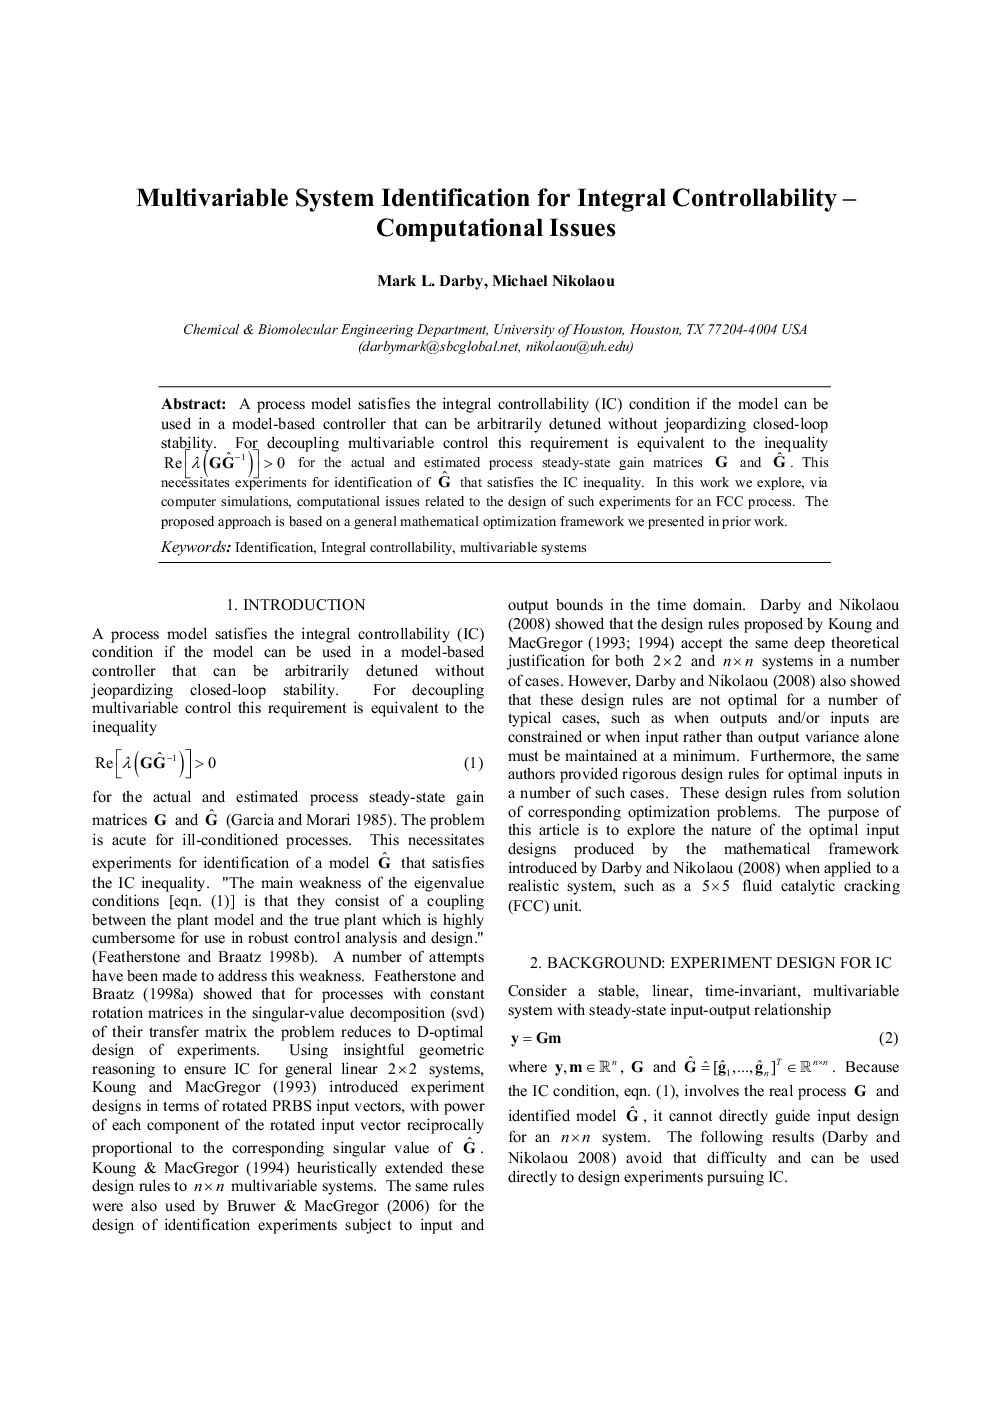 Multivariable System Identification for Integral Controllability – Computational Issues